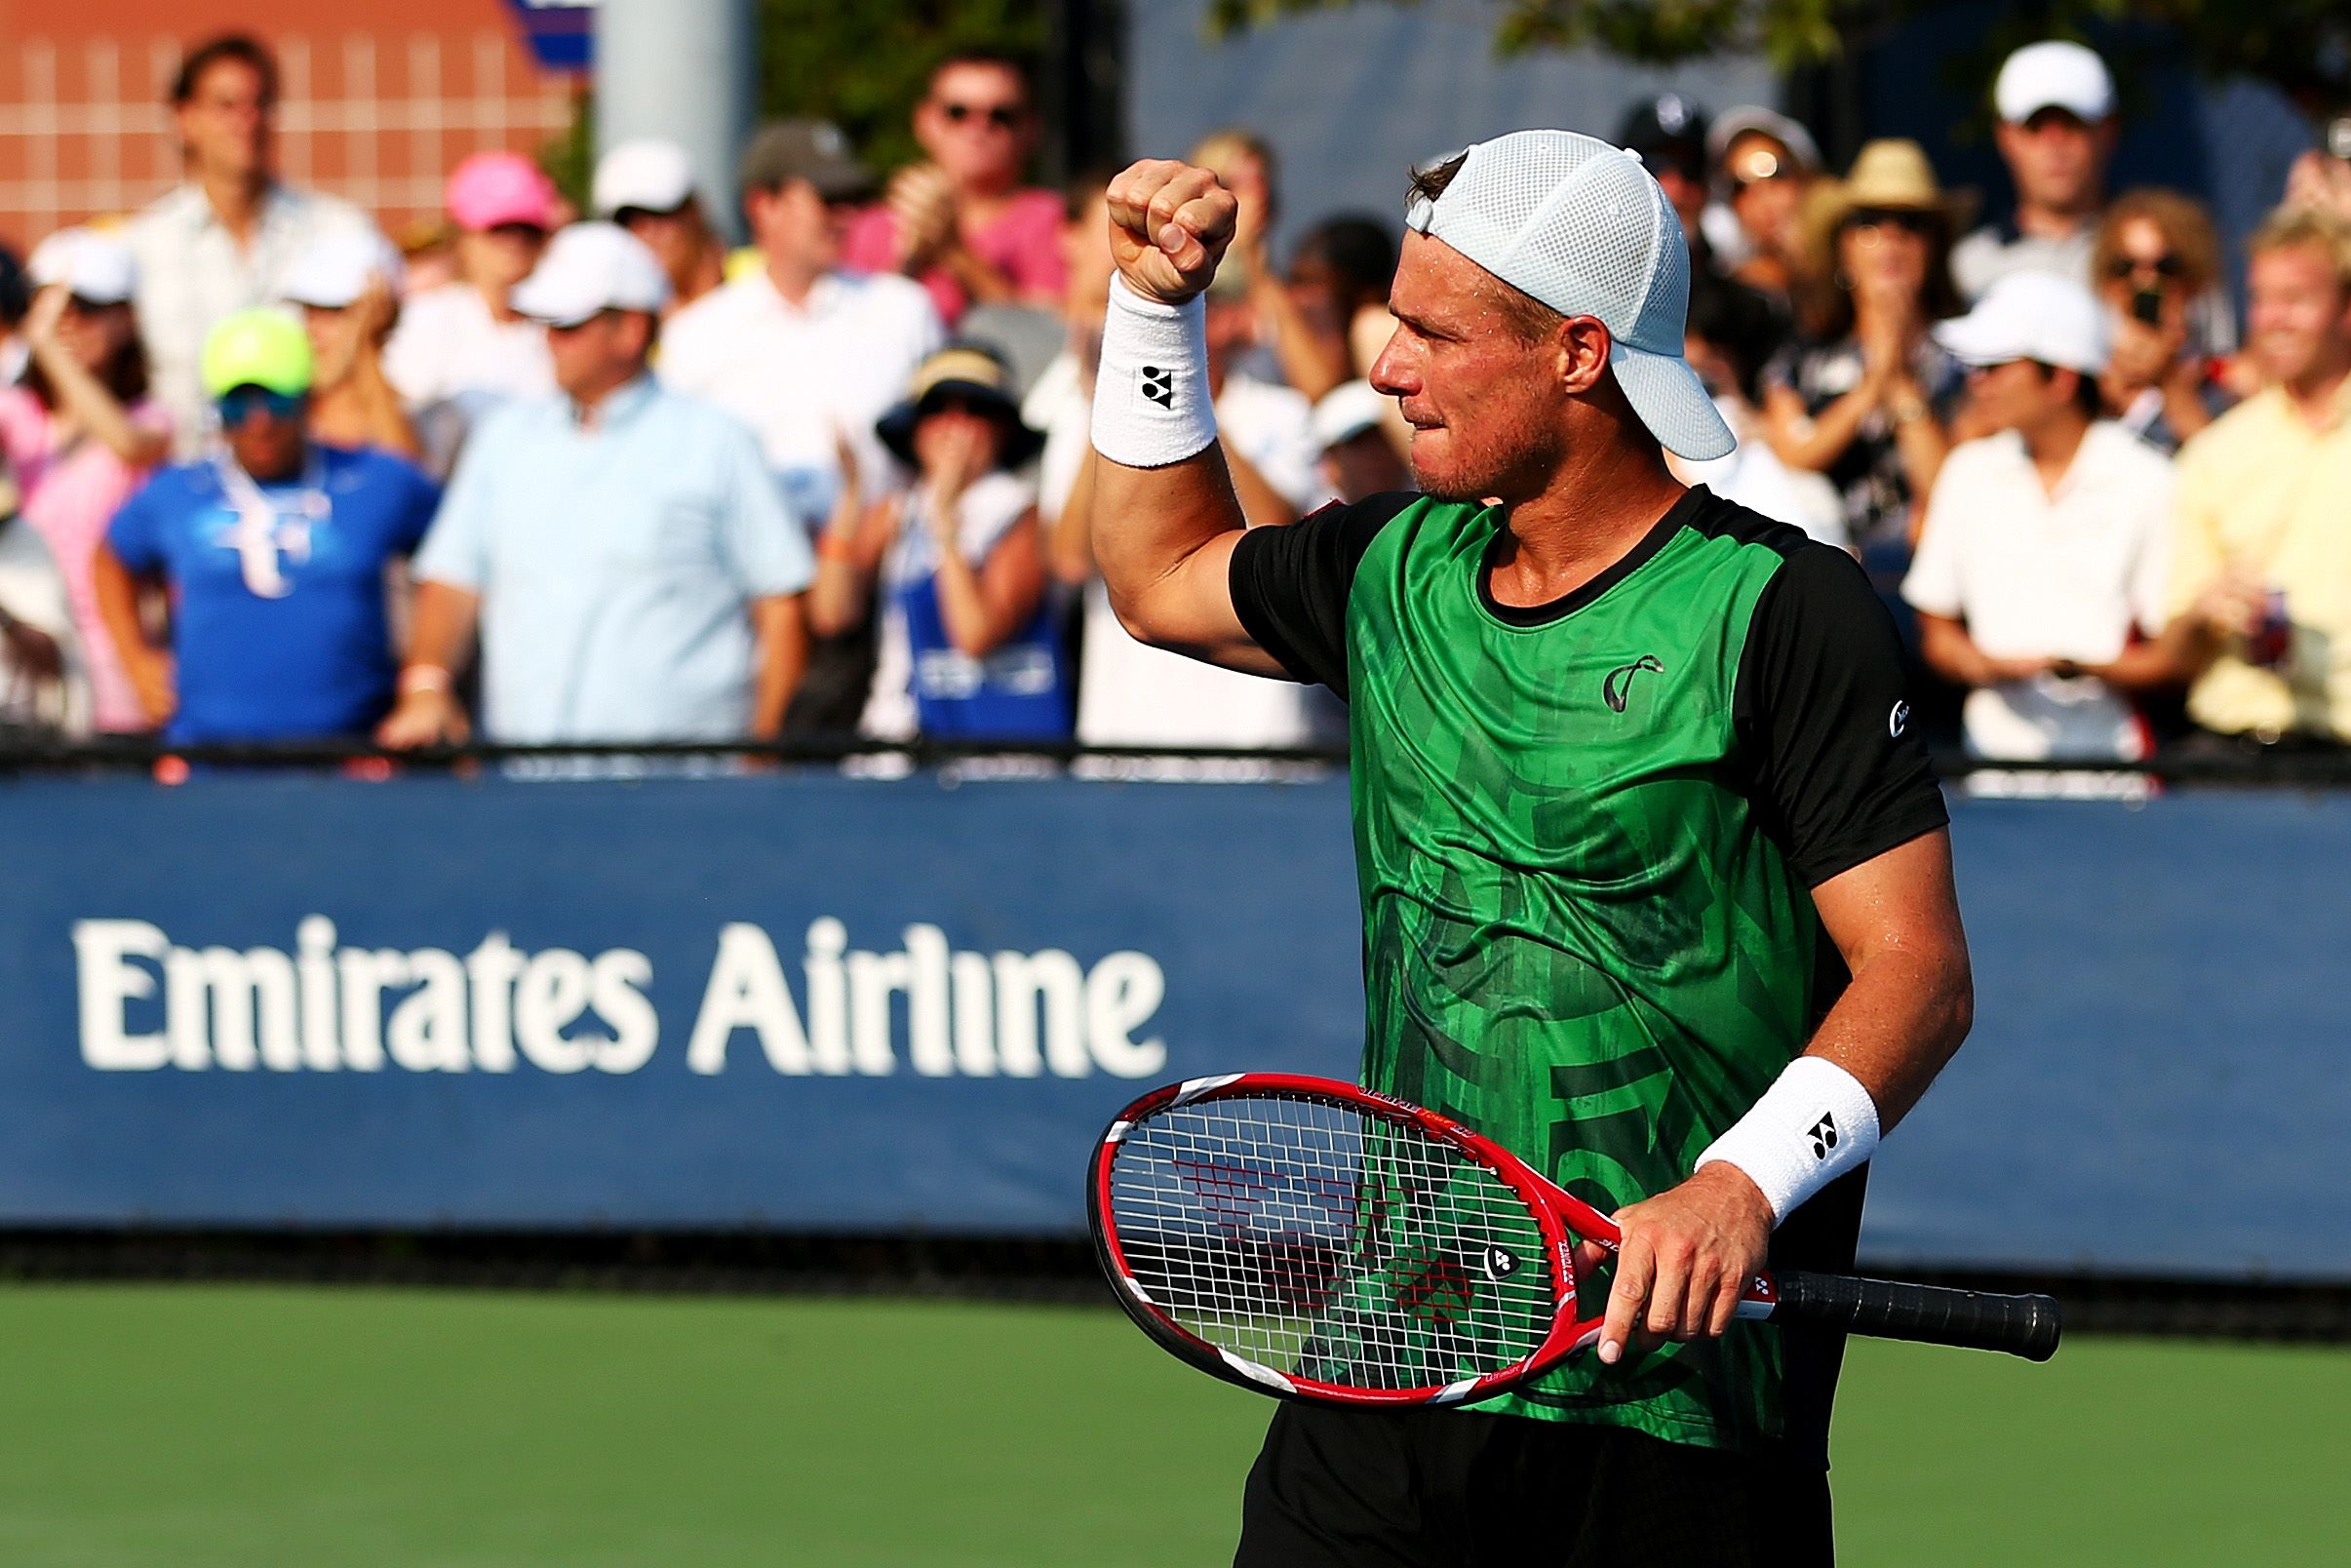 Lleyton Hewitt is appearing in his final US Open. Photo: AFP